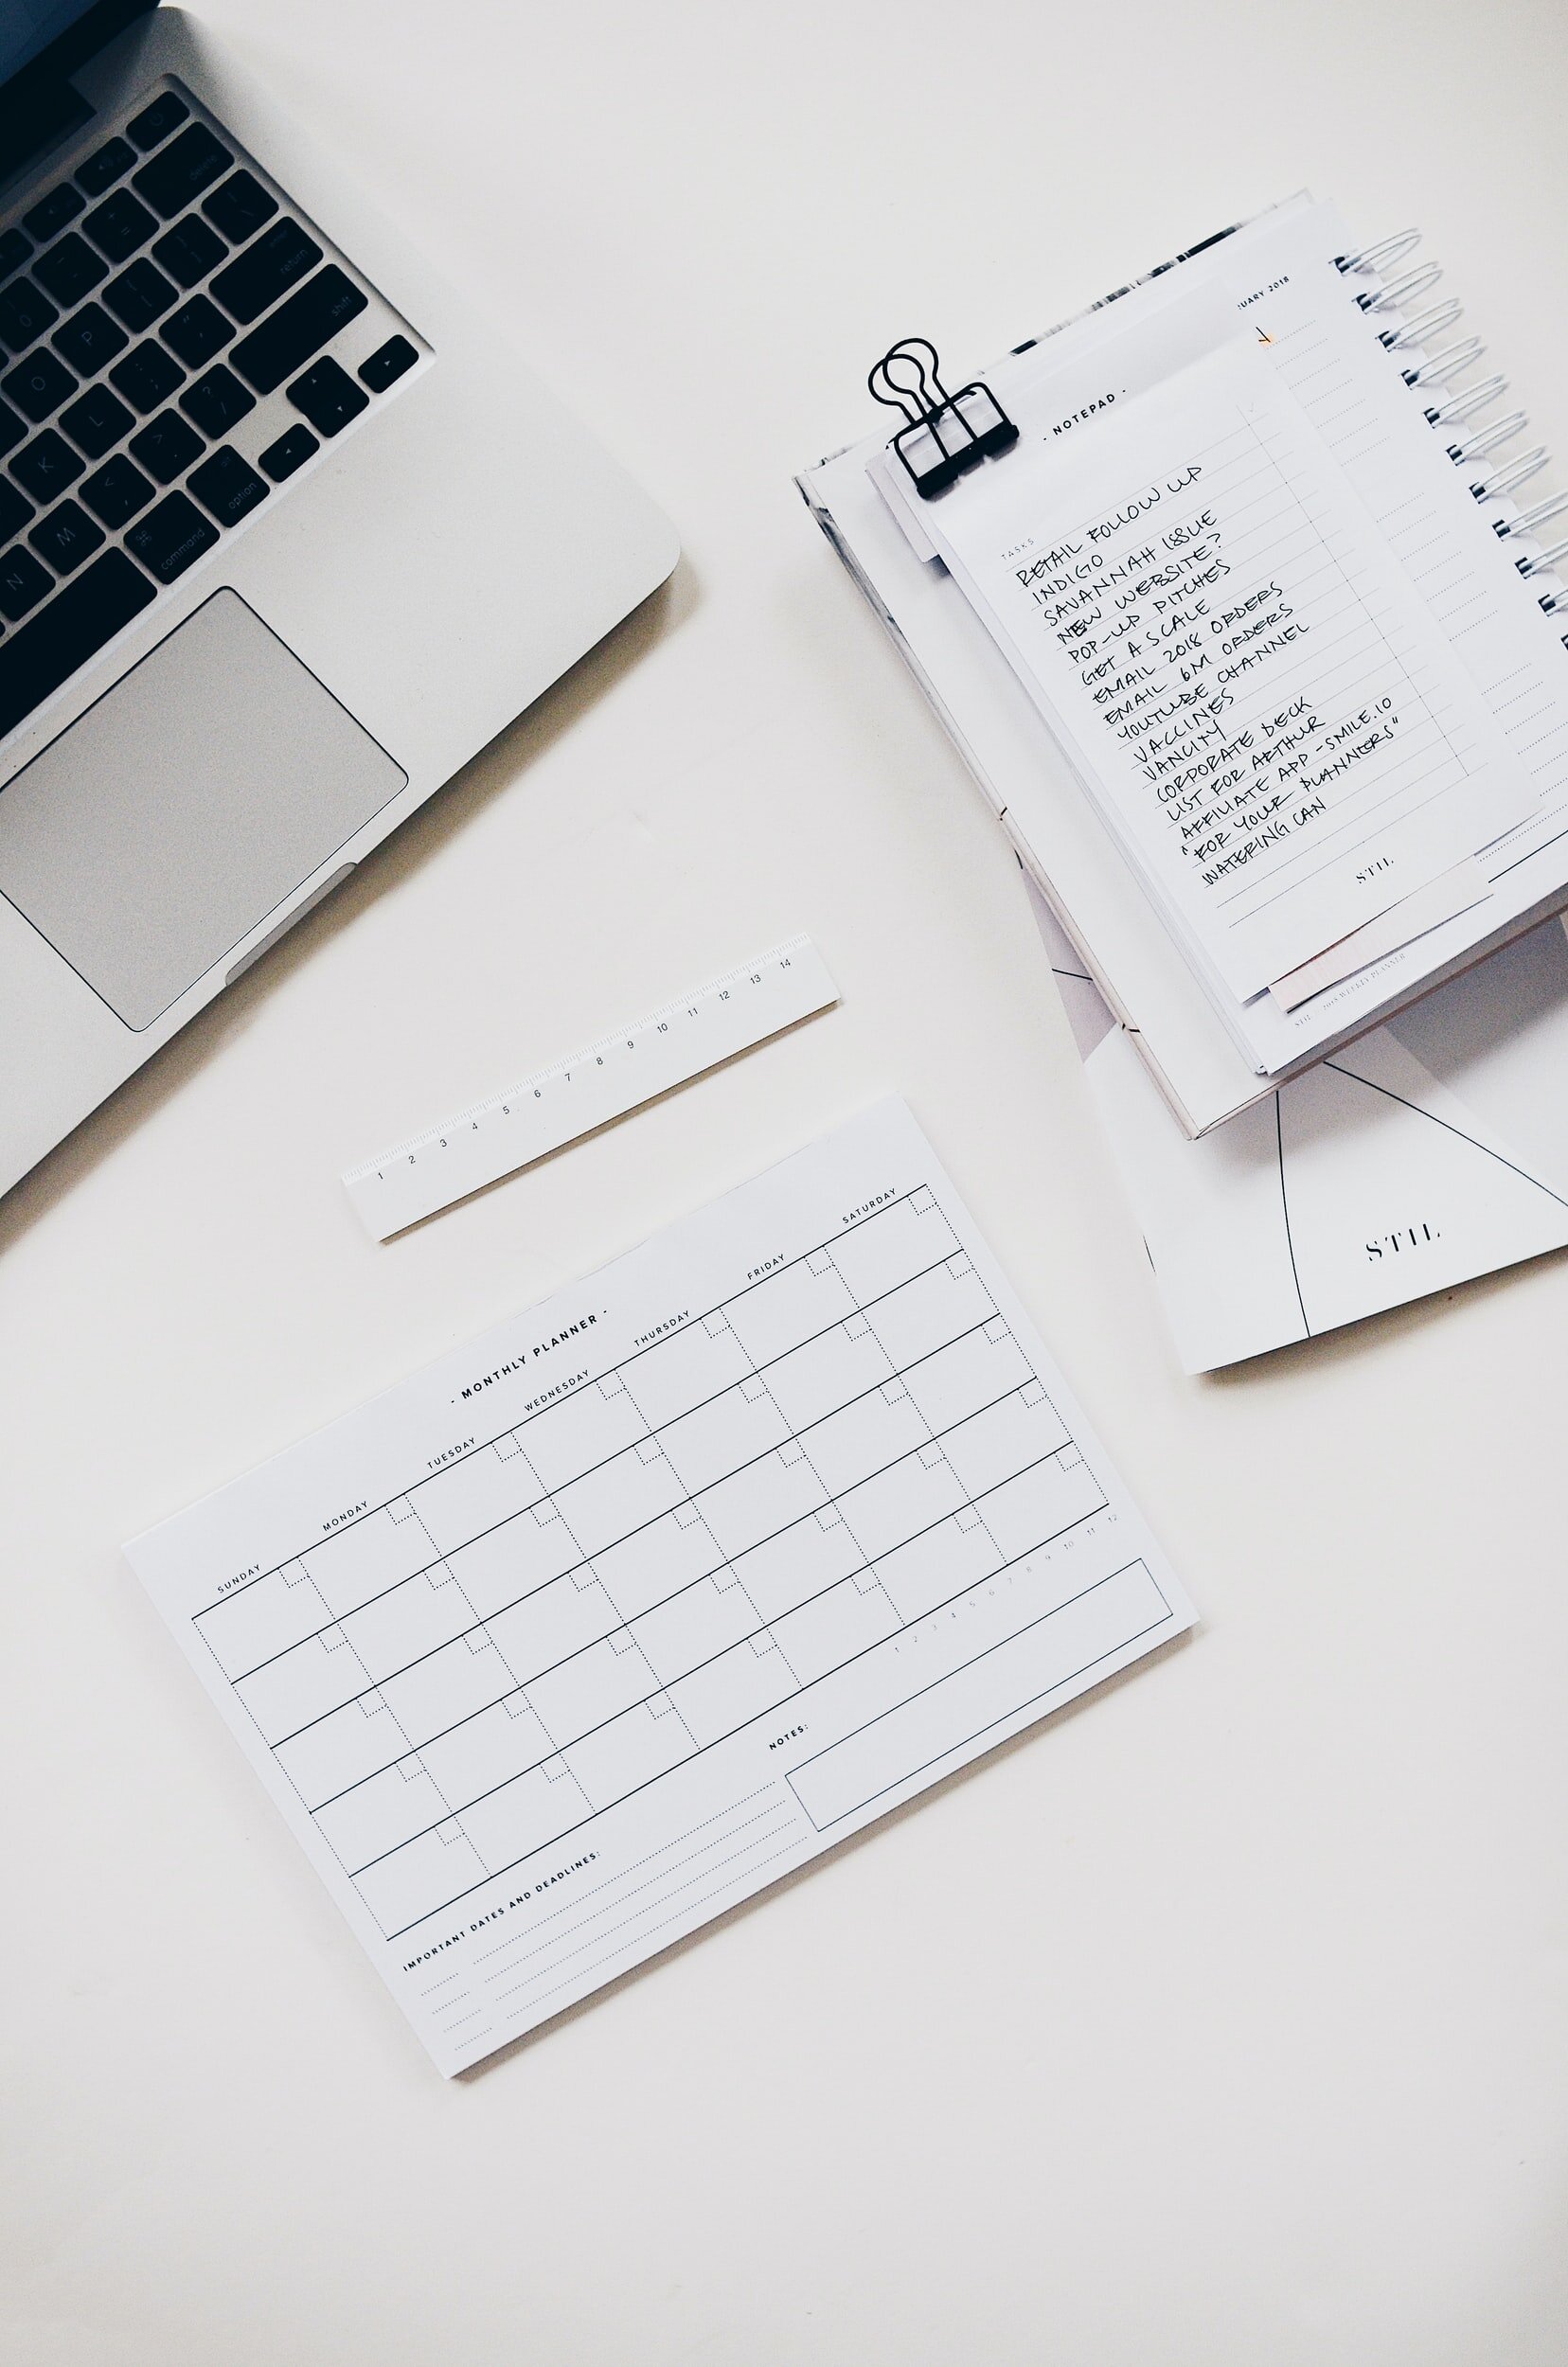 Photo by STIL on Unsplash A monthly planner, a ‘to do” list, and part of a laptop keyboard sit on a white table.